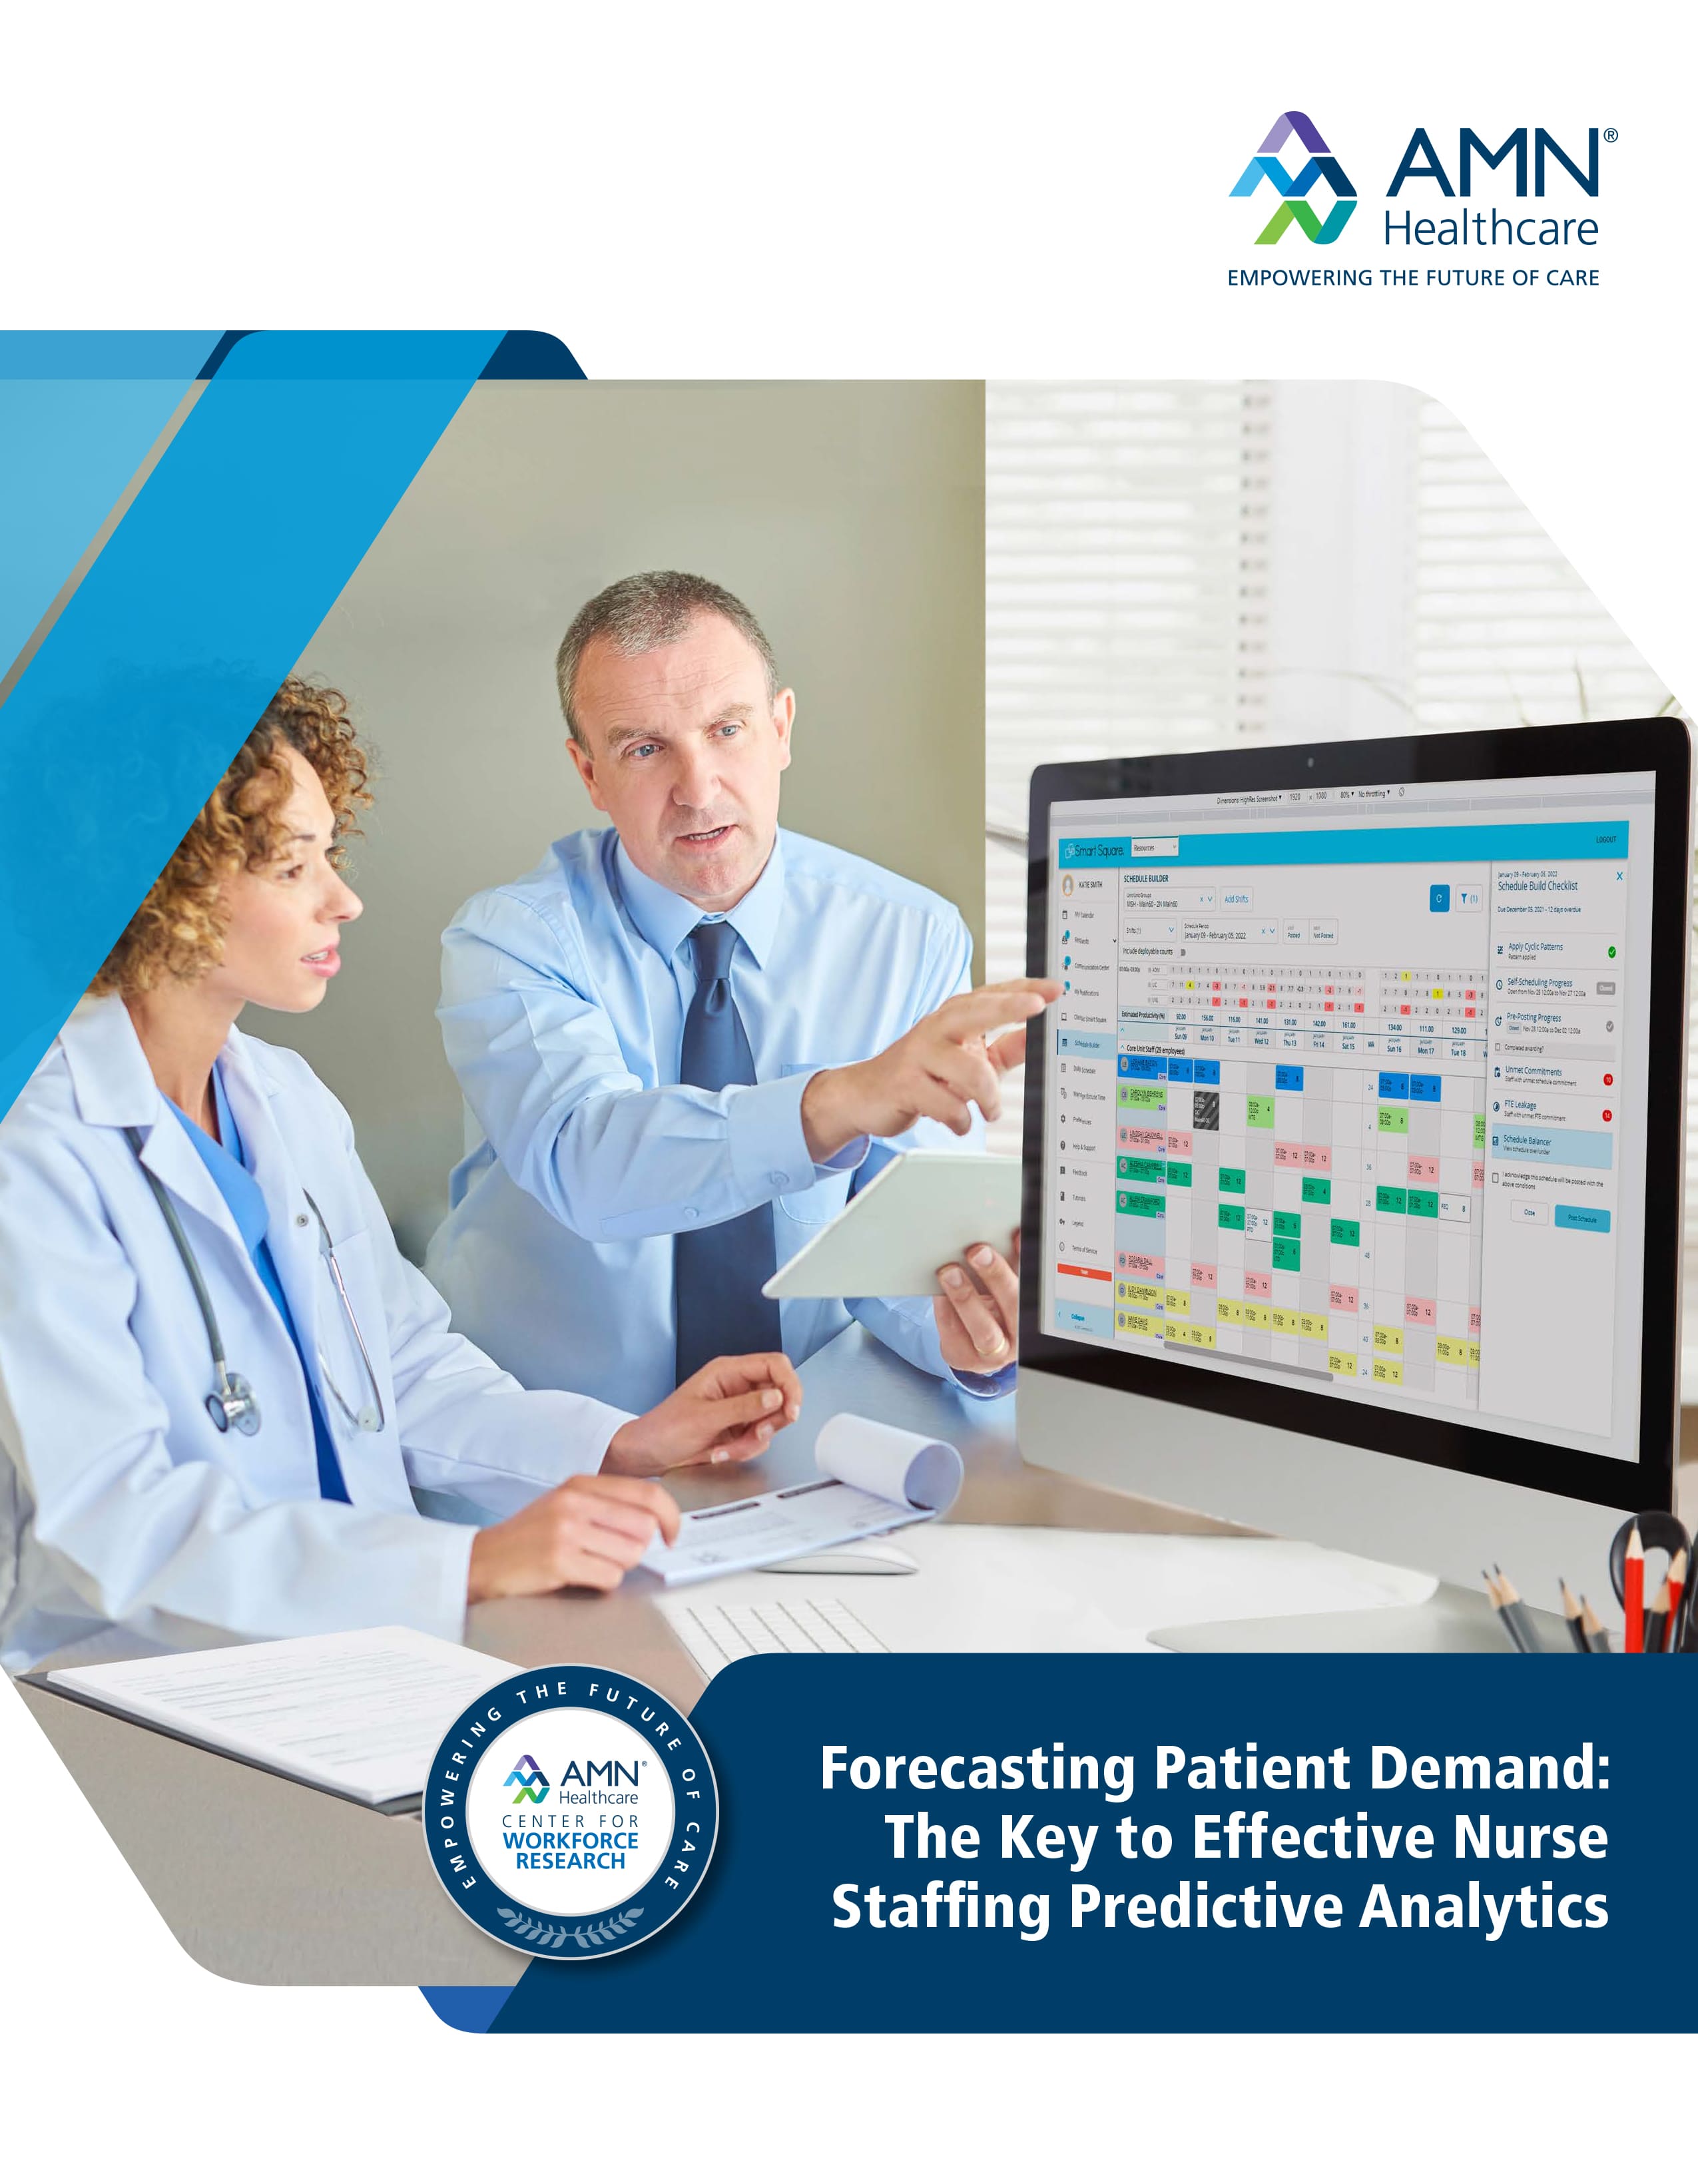 Forecasting-Patient-Demand-The-Key-to-Effective-Nurse-Staffing-Predictive-Analytics-Thumbnail-Cover-min.jpg